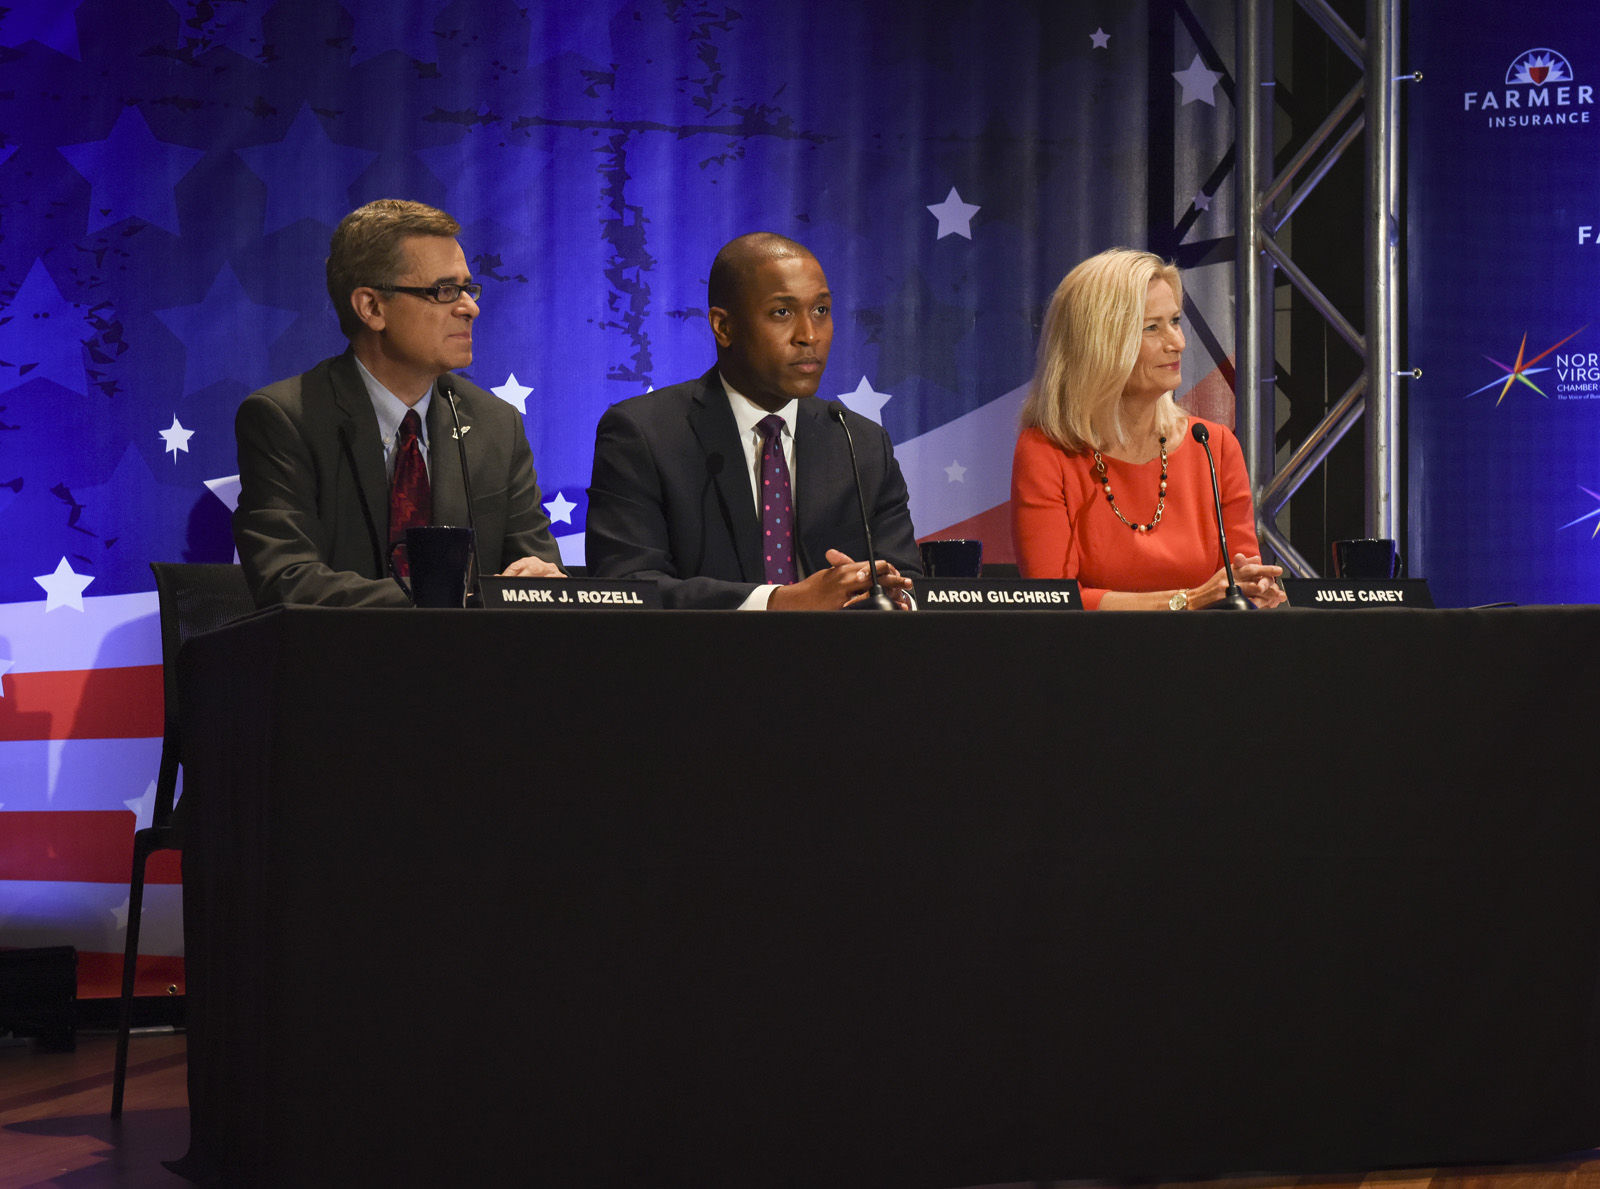 MCLEAN, VA - SEPTEMBER 19:
The panel for tonight's gubernatorial debate between Republican candidate Ed Gillespie, and Lt. Gov. Ralph Northam, Democrat, on September, 19, 2017 in McLean, VA. From left are Mark J. Rozell, Aaron Gilchrist, and Julie Carey.
(Pool Photo by Bill O'Leary/The Washington Post)